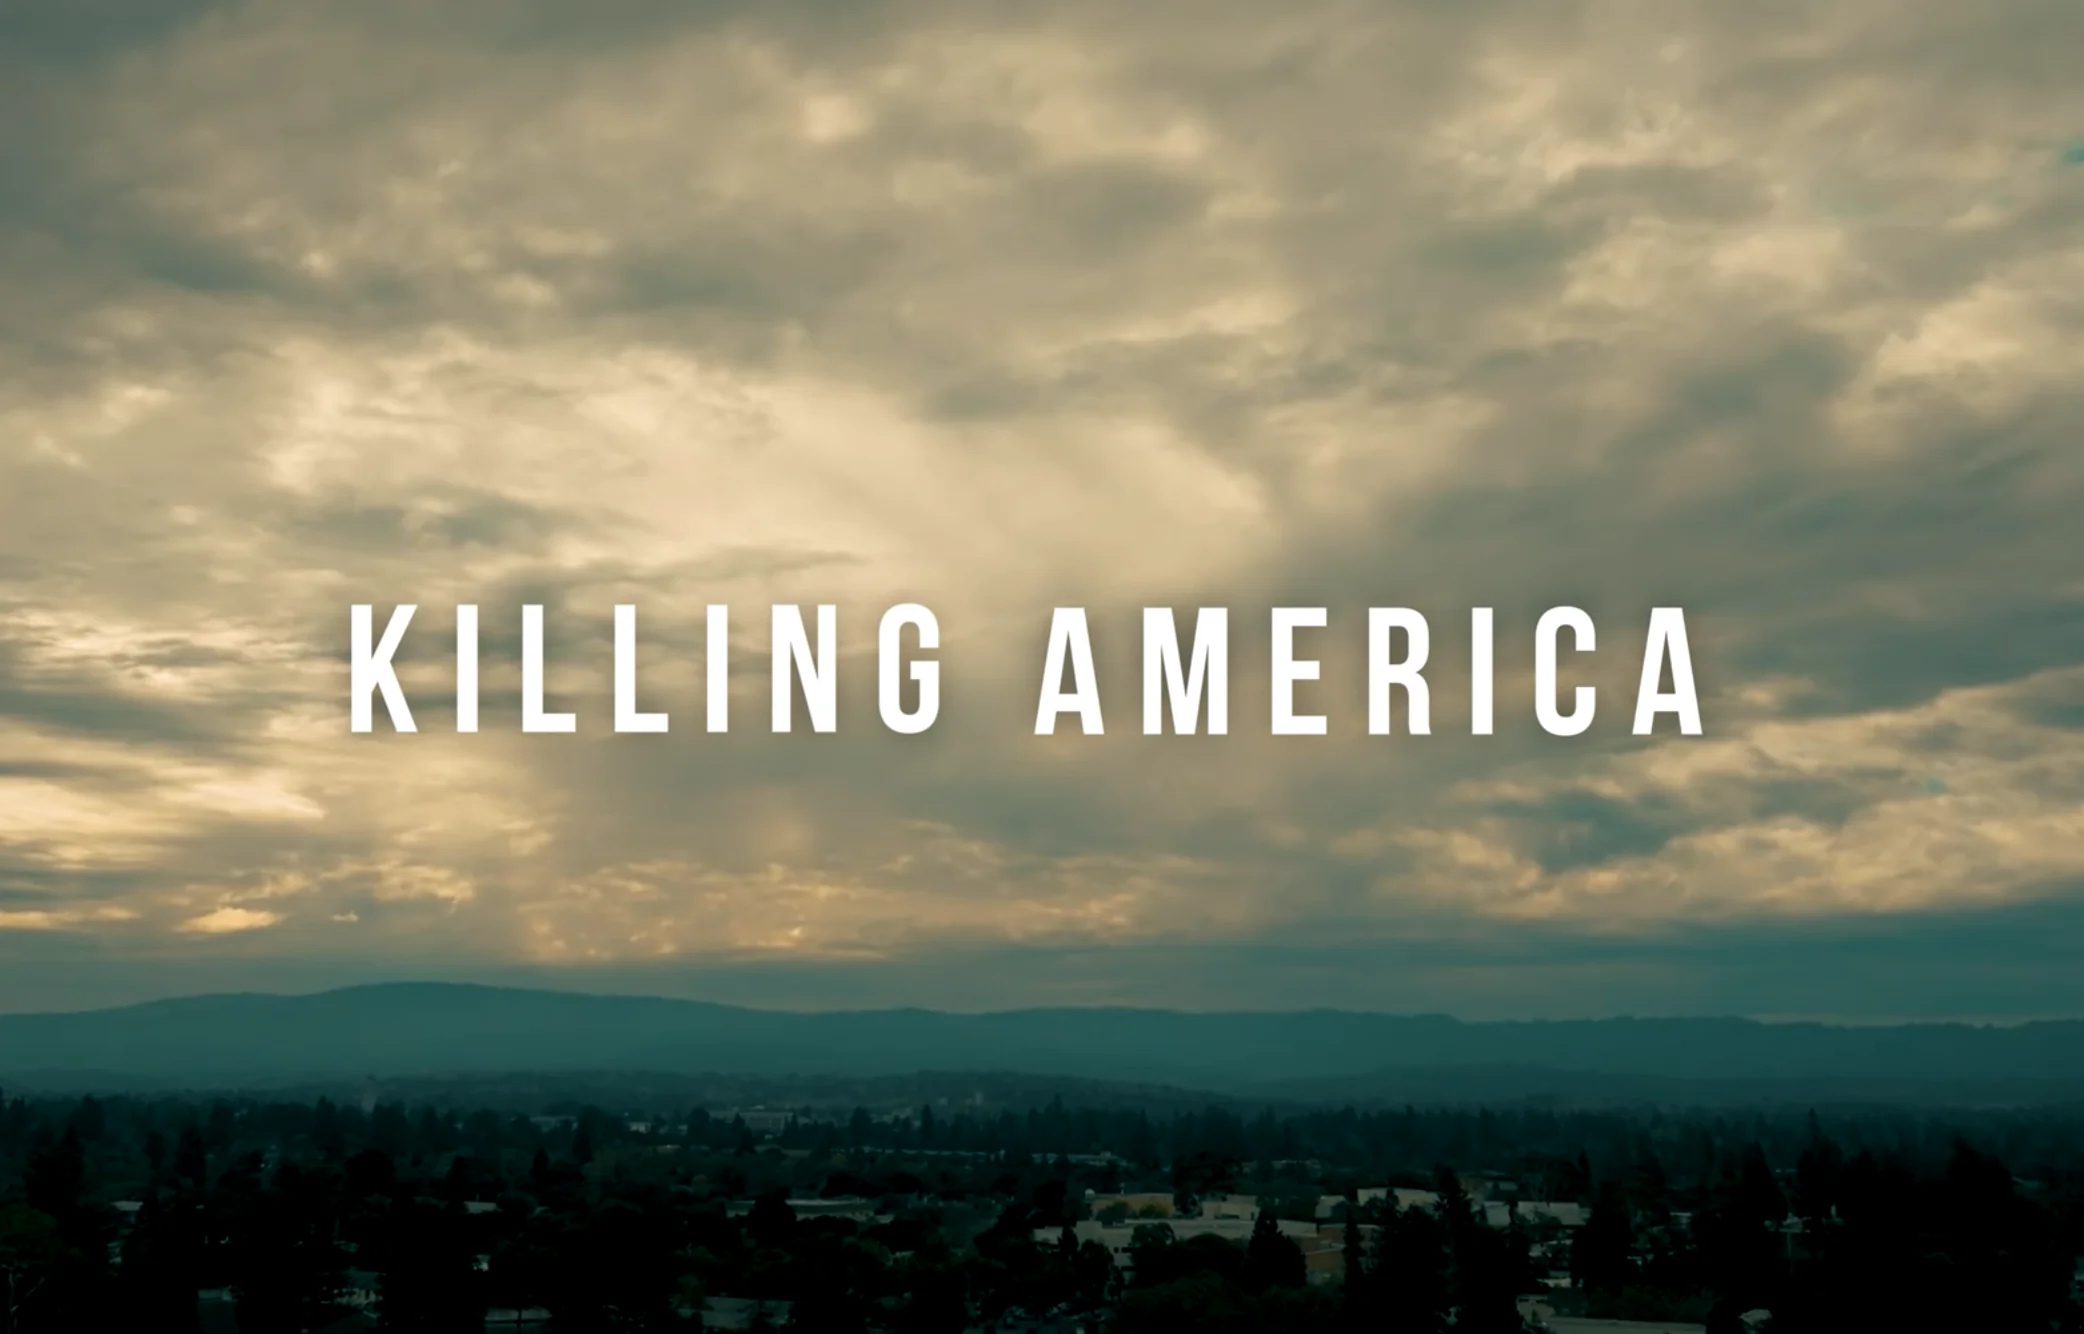 ‘Killing America’ Unmasks the Woke Trifecta of Indoctrination, Dumbing-Down, and Discrimination